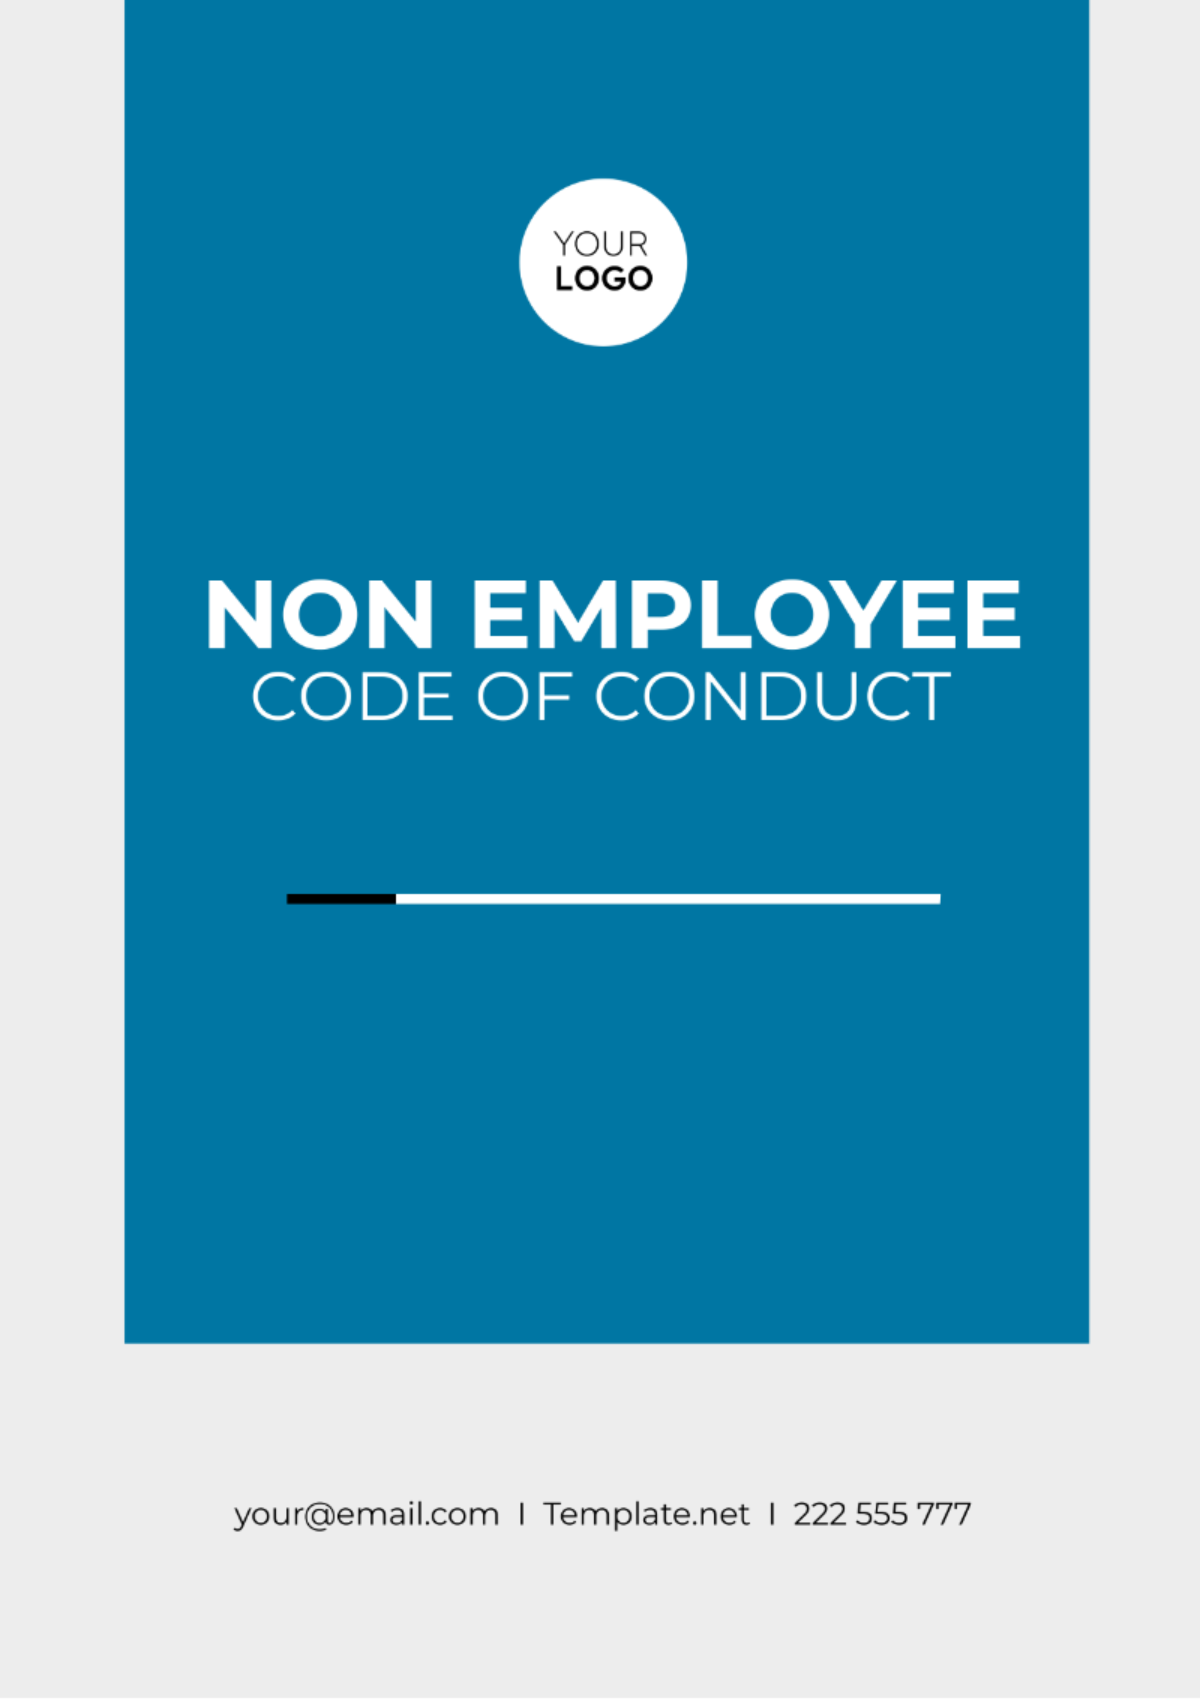 Non Employee Code of Conduct Template